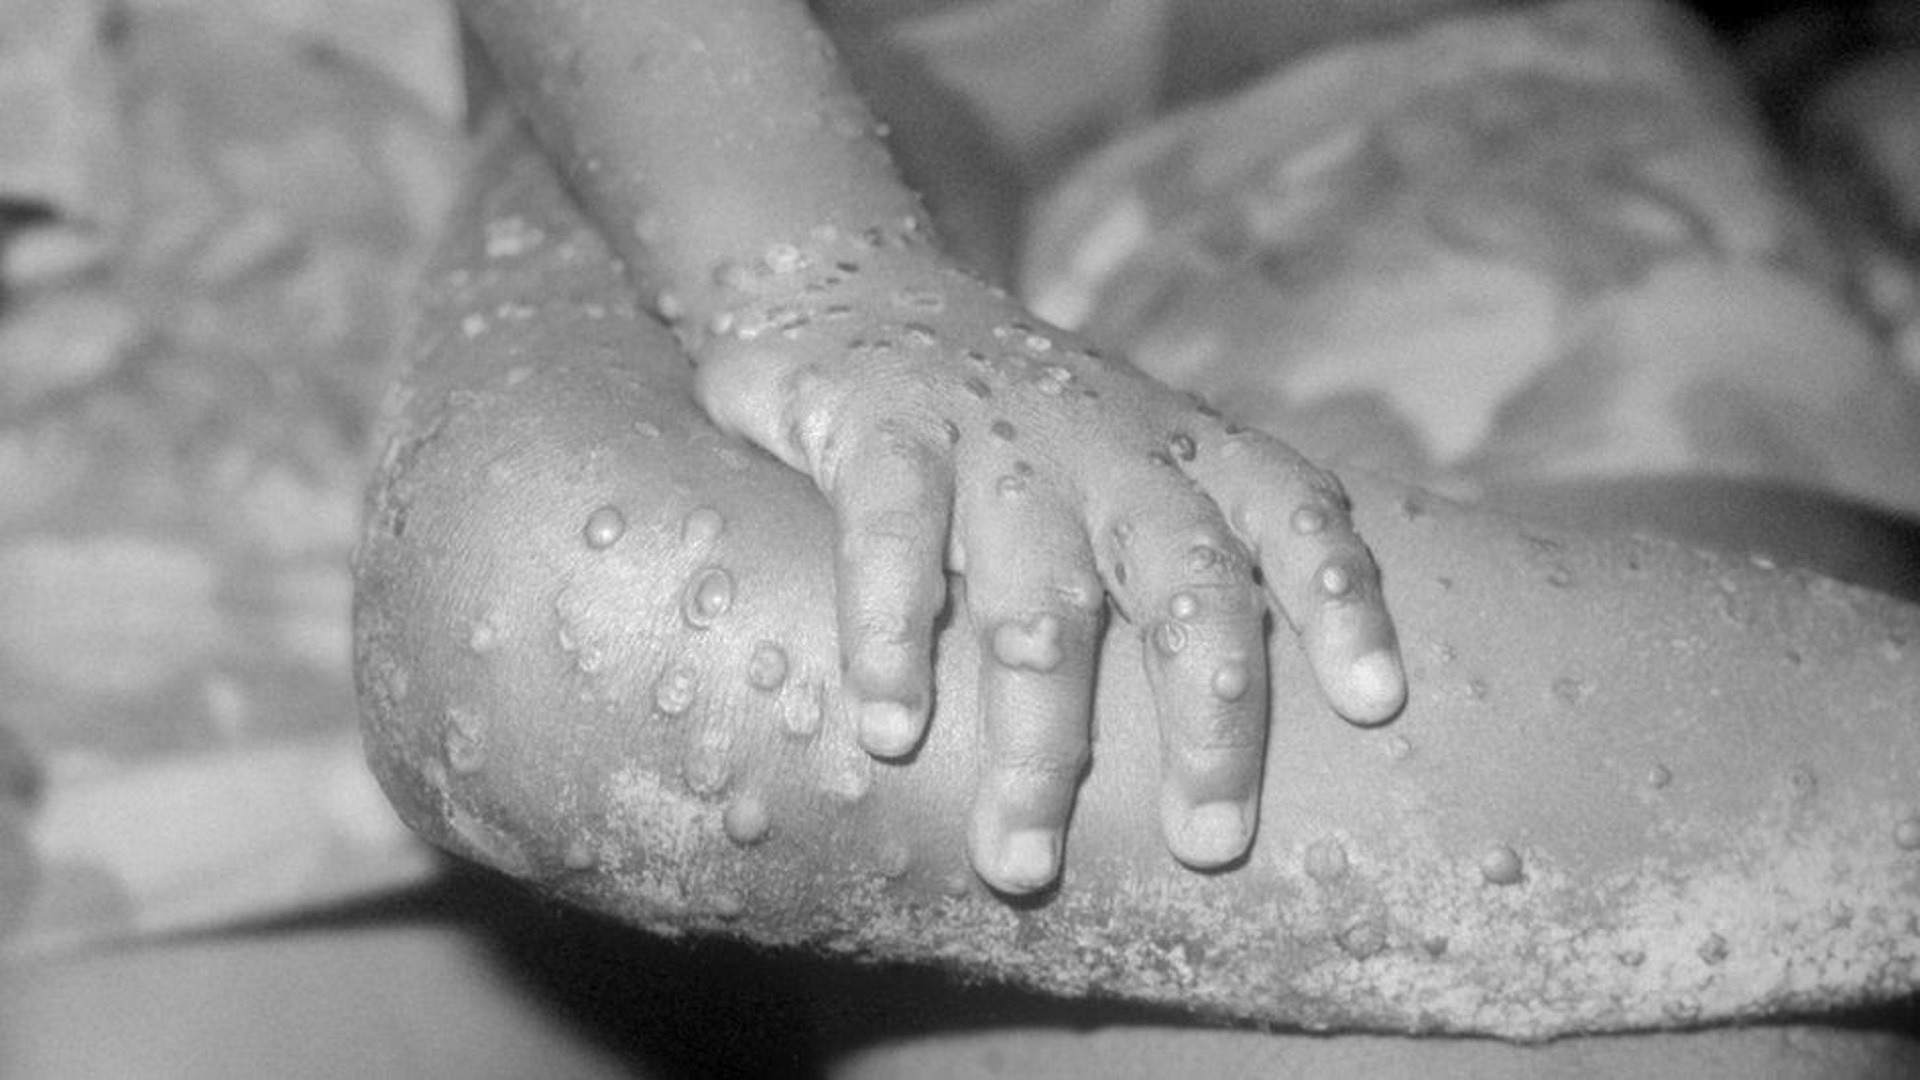 Symptoms of monkeypox include a rash, fever, headache, muscle aches, backache, swollen lymph nodes, chills and exhaustion. Photo Credit:  GETTY IMAGES